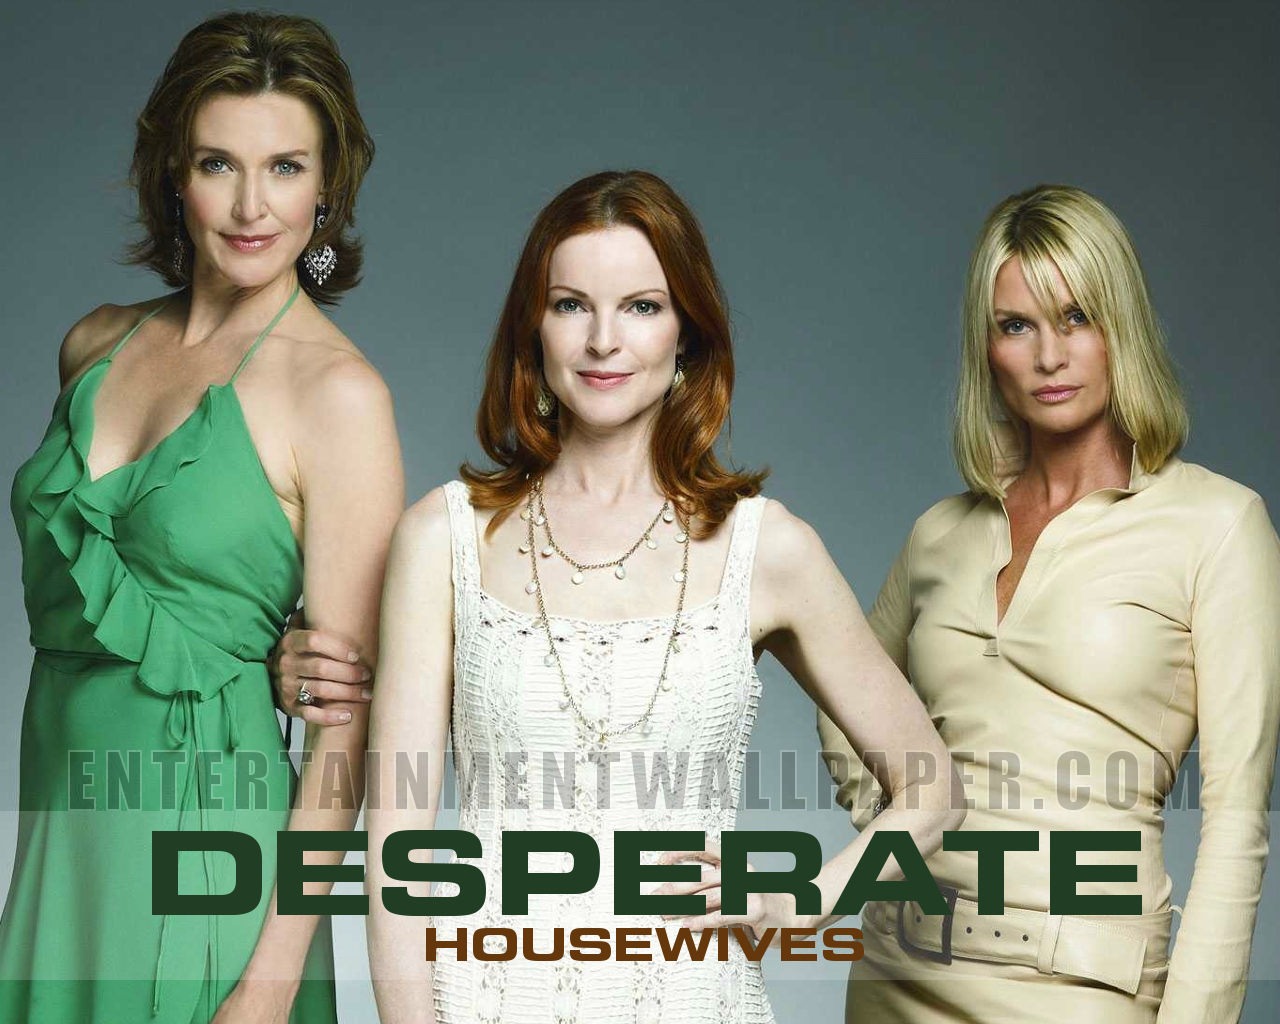 Desperate Housewives 絕望的主婦 #48 - 1280x1024